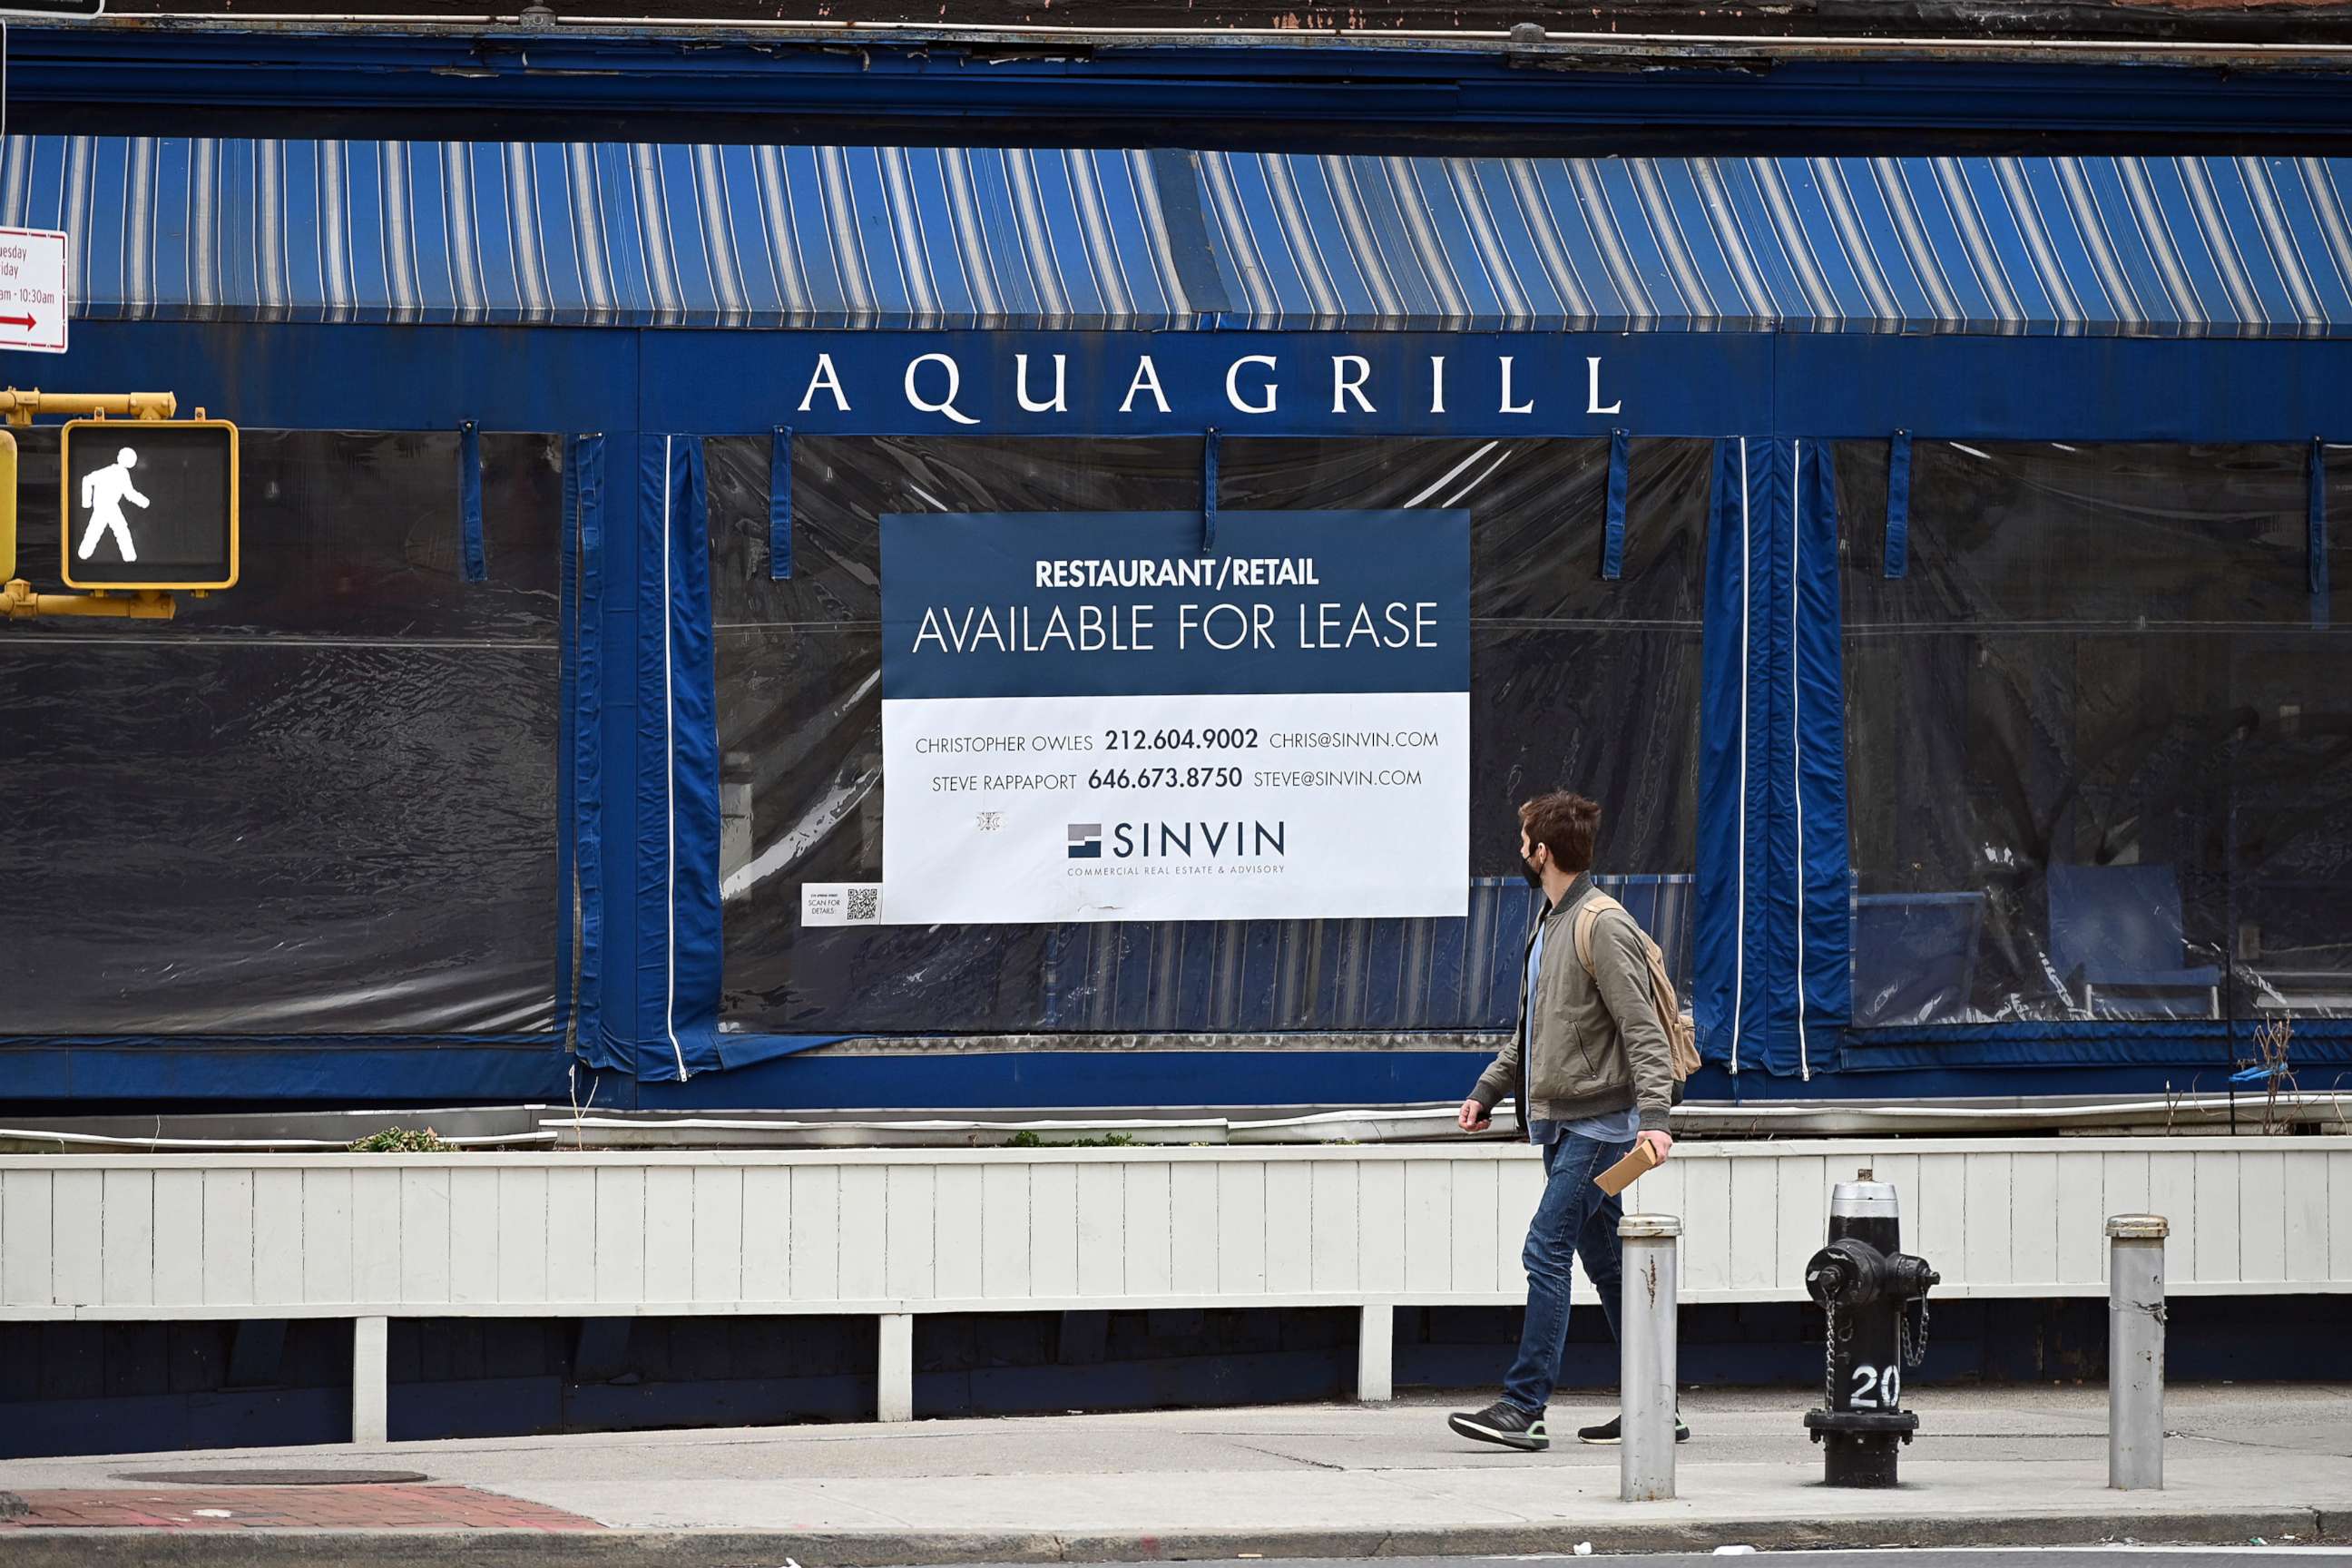 PHOTO: Exterior view of Aquagrill restaurant now permanently closed due to the economic impact of the COVID-19 pandemic in New York City, March 16, 2021.